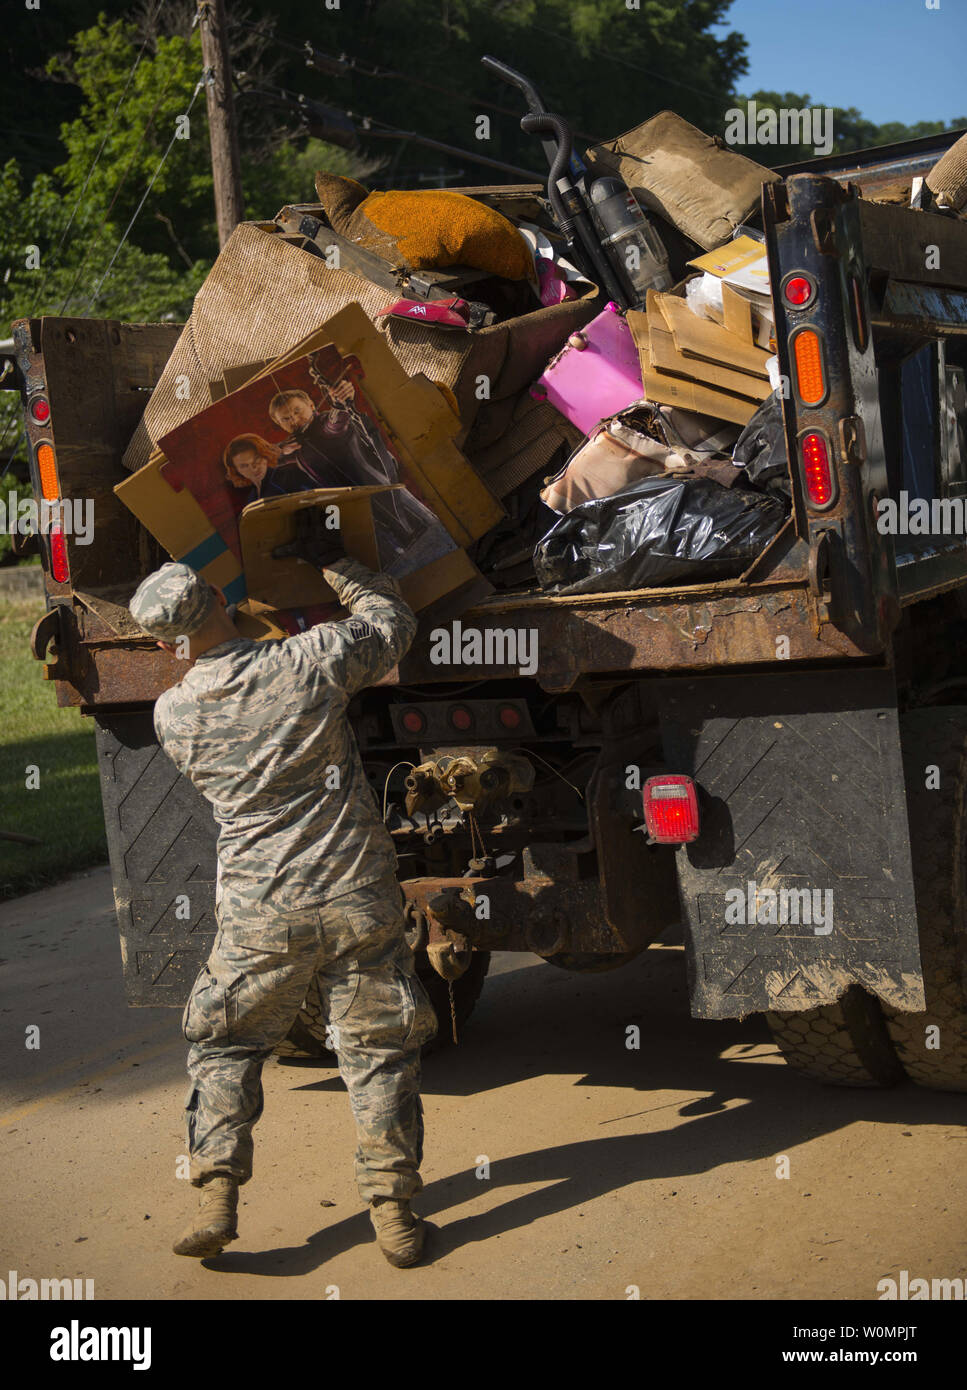 Tech. Sgt. Brian Grim of the 167th Airlift Wing, Martinsburg, W.Va., picks up debris on June 26, 2016, in Clendenin, West Virginia. The June 23, 2016 flood was described as a once in 1000 year event leading W.Va. Gov. Earl Ray Tomblin to declare a State of Emergency in 44 of the 55 counties.      Photo by Tech. Sgt. De-Juan Haley/United States Air National Guard/UPI Stock Photo